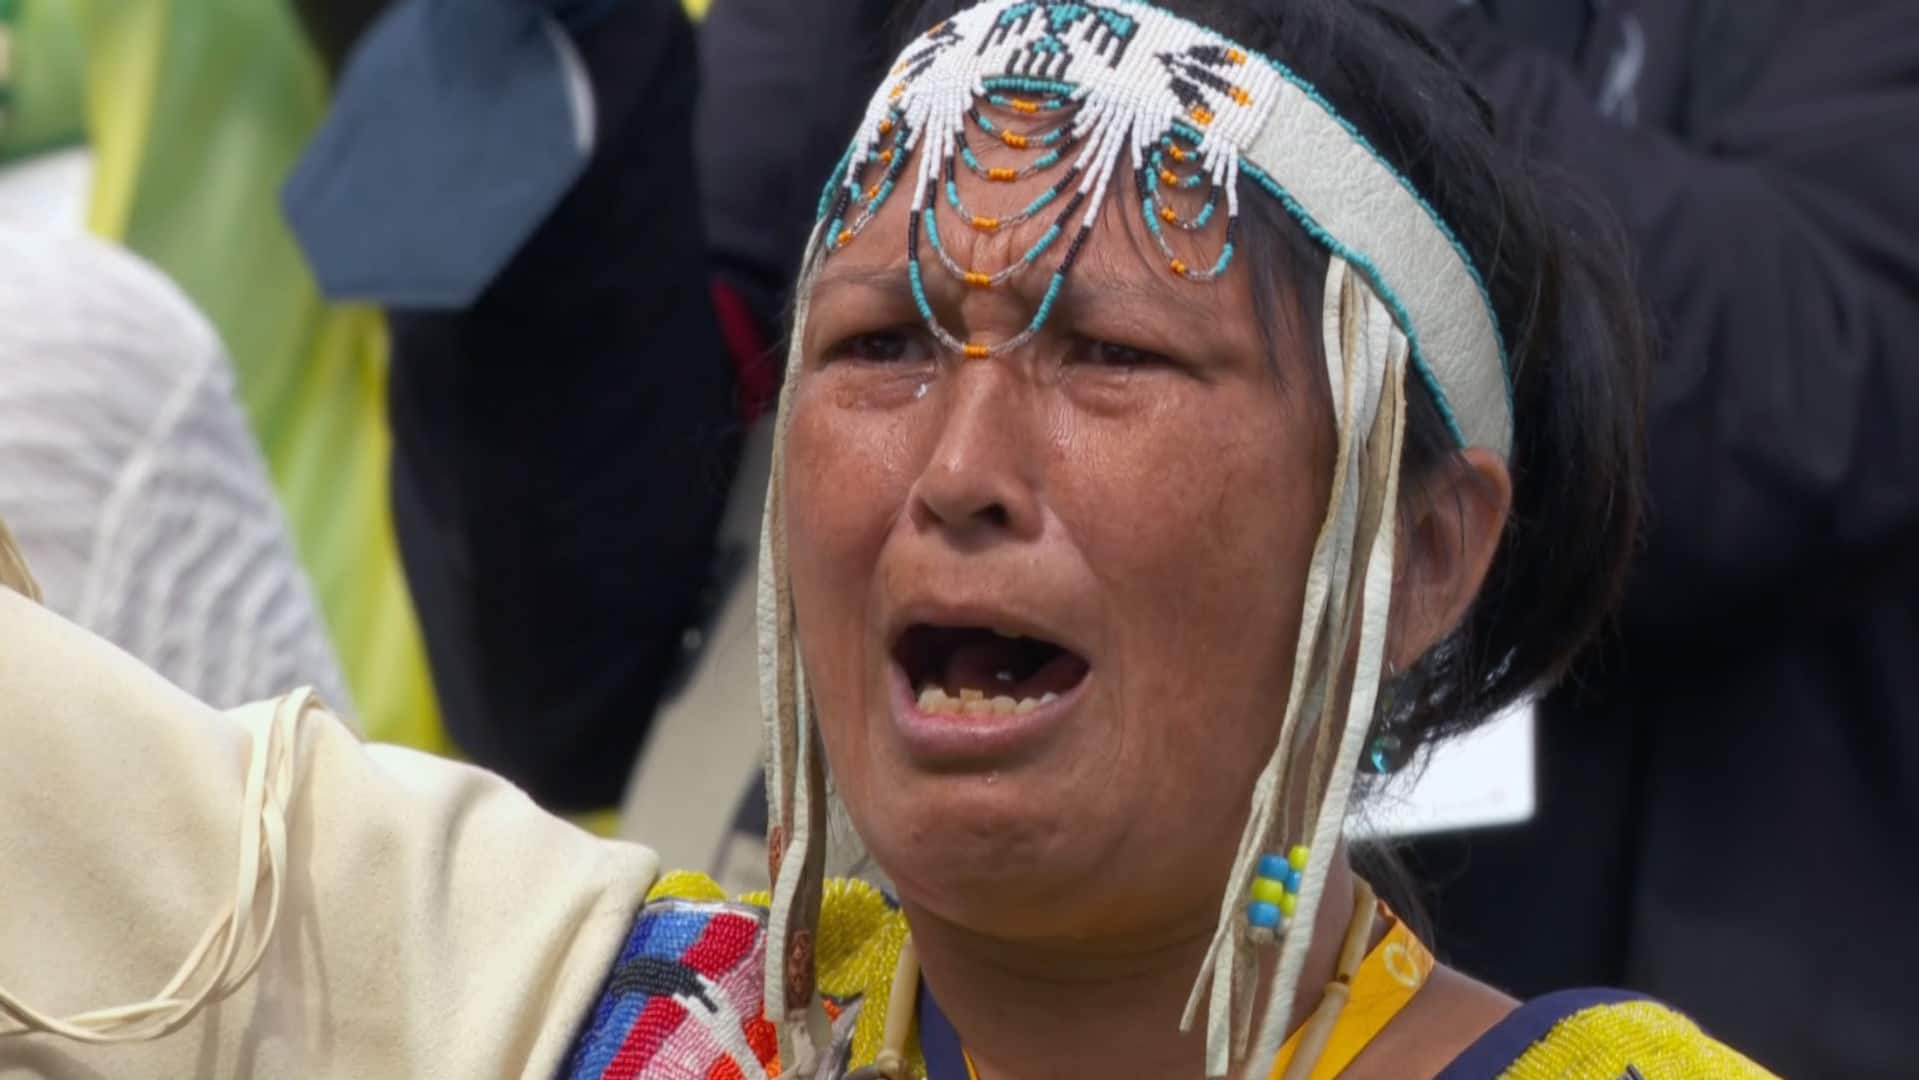 i couldnt stay silent says cree singer who performed powerful message for pope francis